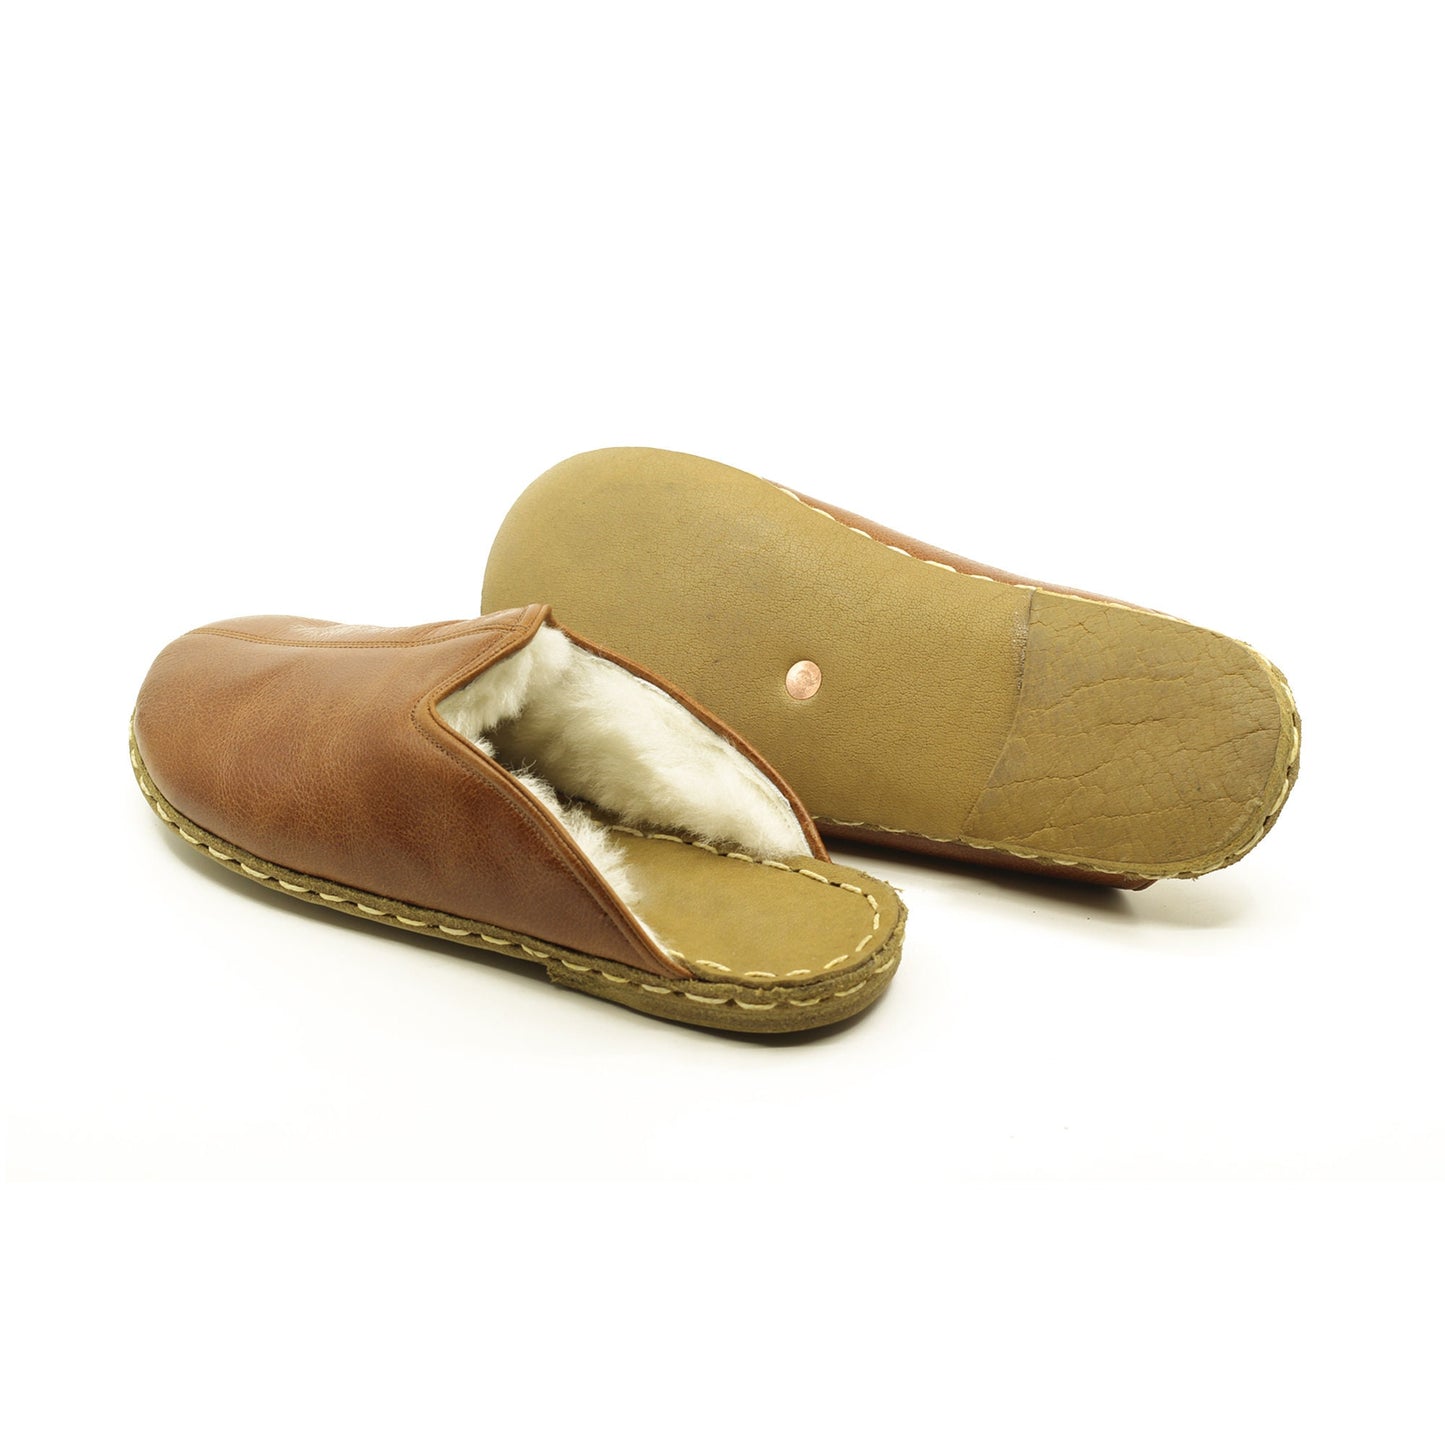 men's slippers fur fuzzy leather outdoor or indoor spring summer slipper nubuc brown- nefesshoes